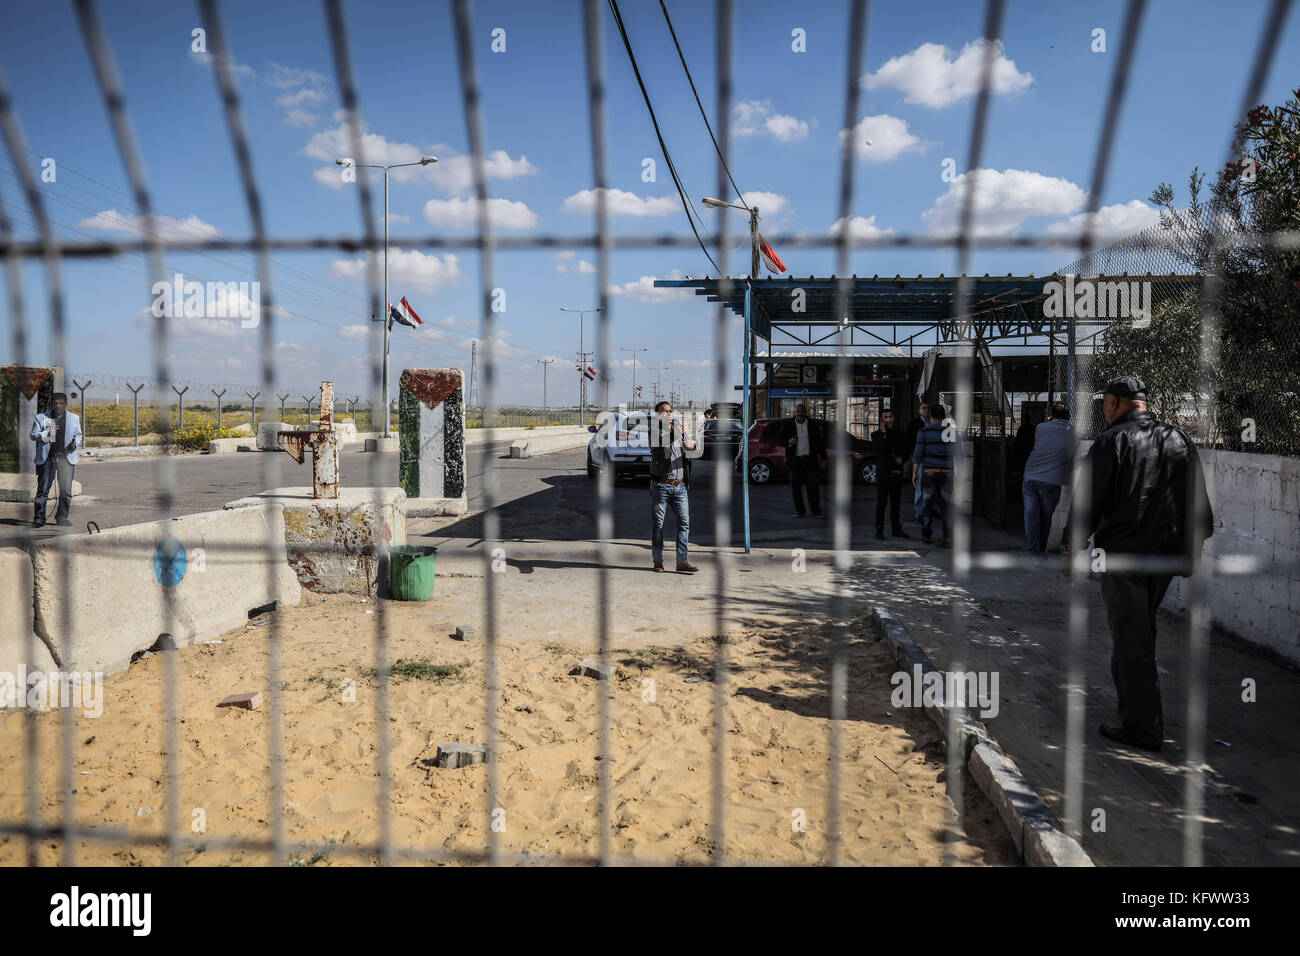 Beit Hanun, Gaza Strip. 01st Nov, 2017. An employee of Palestinian Authority gestures at the Erez border crossing between Israel and Gaza in Beit Hanun, Gaza Strip, 01 November 2017. Following their reconciliation agreement Hamas handed over control of the Gaza Strip's borders with Egypt and Israel to the Palestinian Authority. Credit: Wissam Nassar/dpa/Alamy Live News Stock Photo